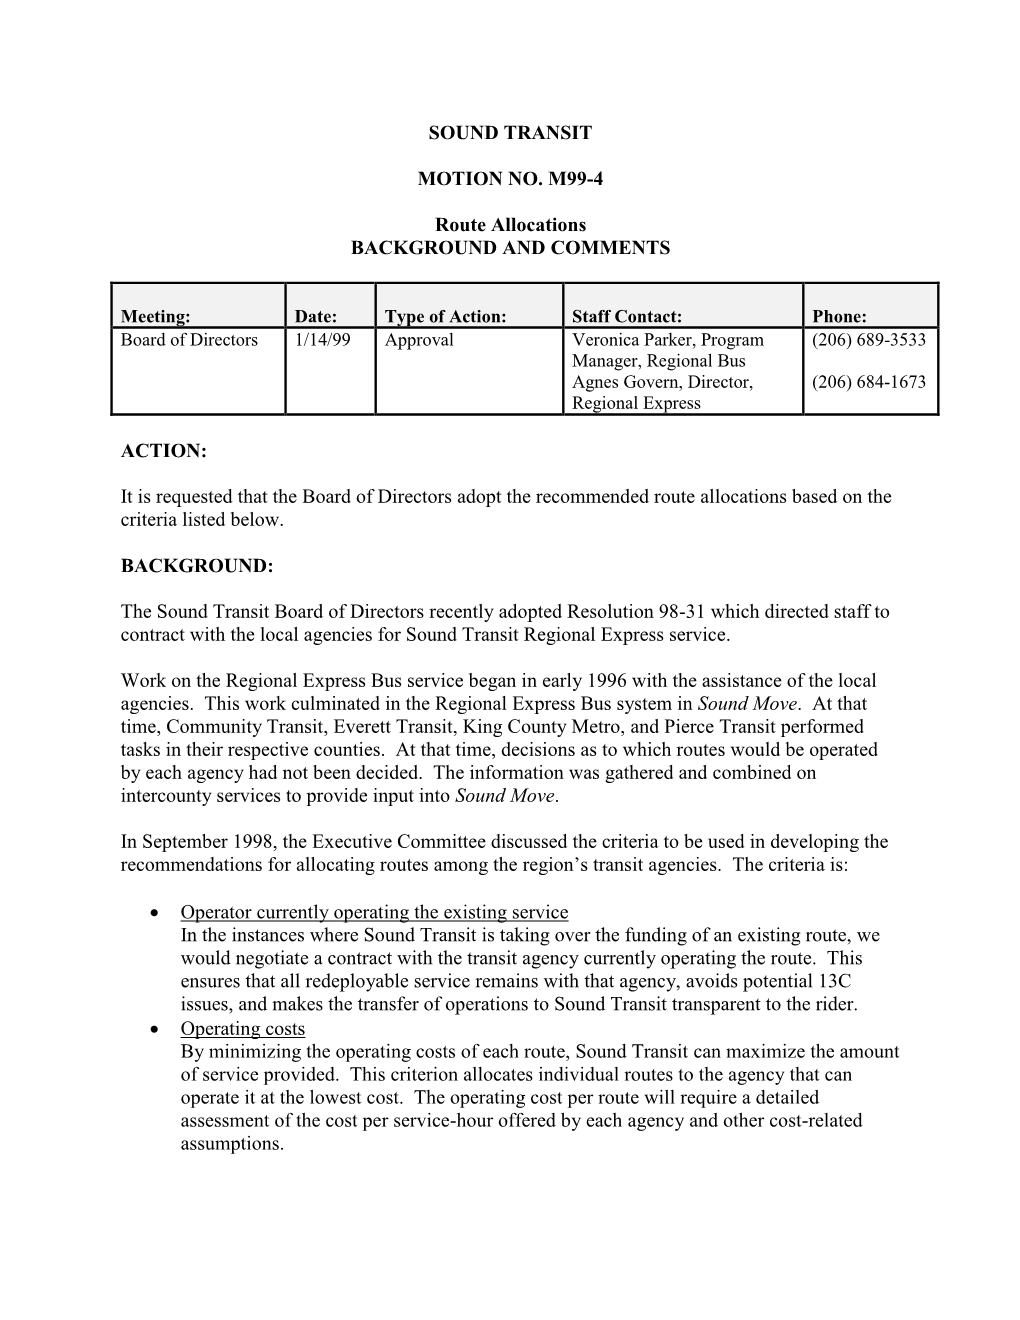 SOUND TRANSIT MOTION NO. M99-4 Route Allocations BACKGROUND and COMMENTS ACTION: It Is Requested That the Board of Directors